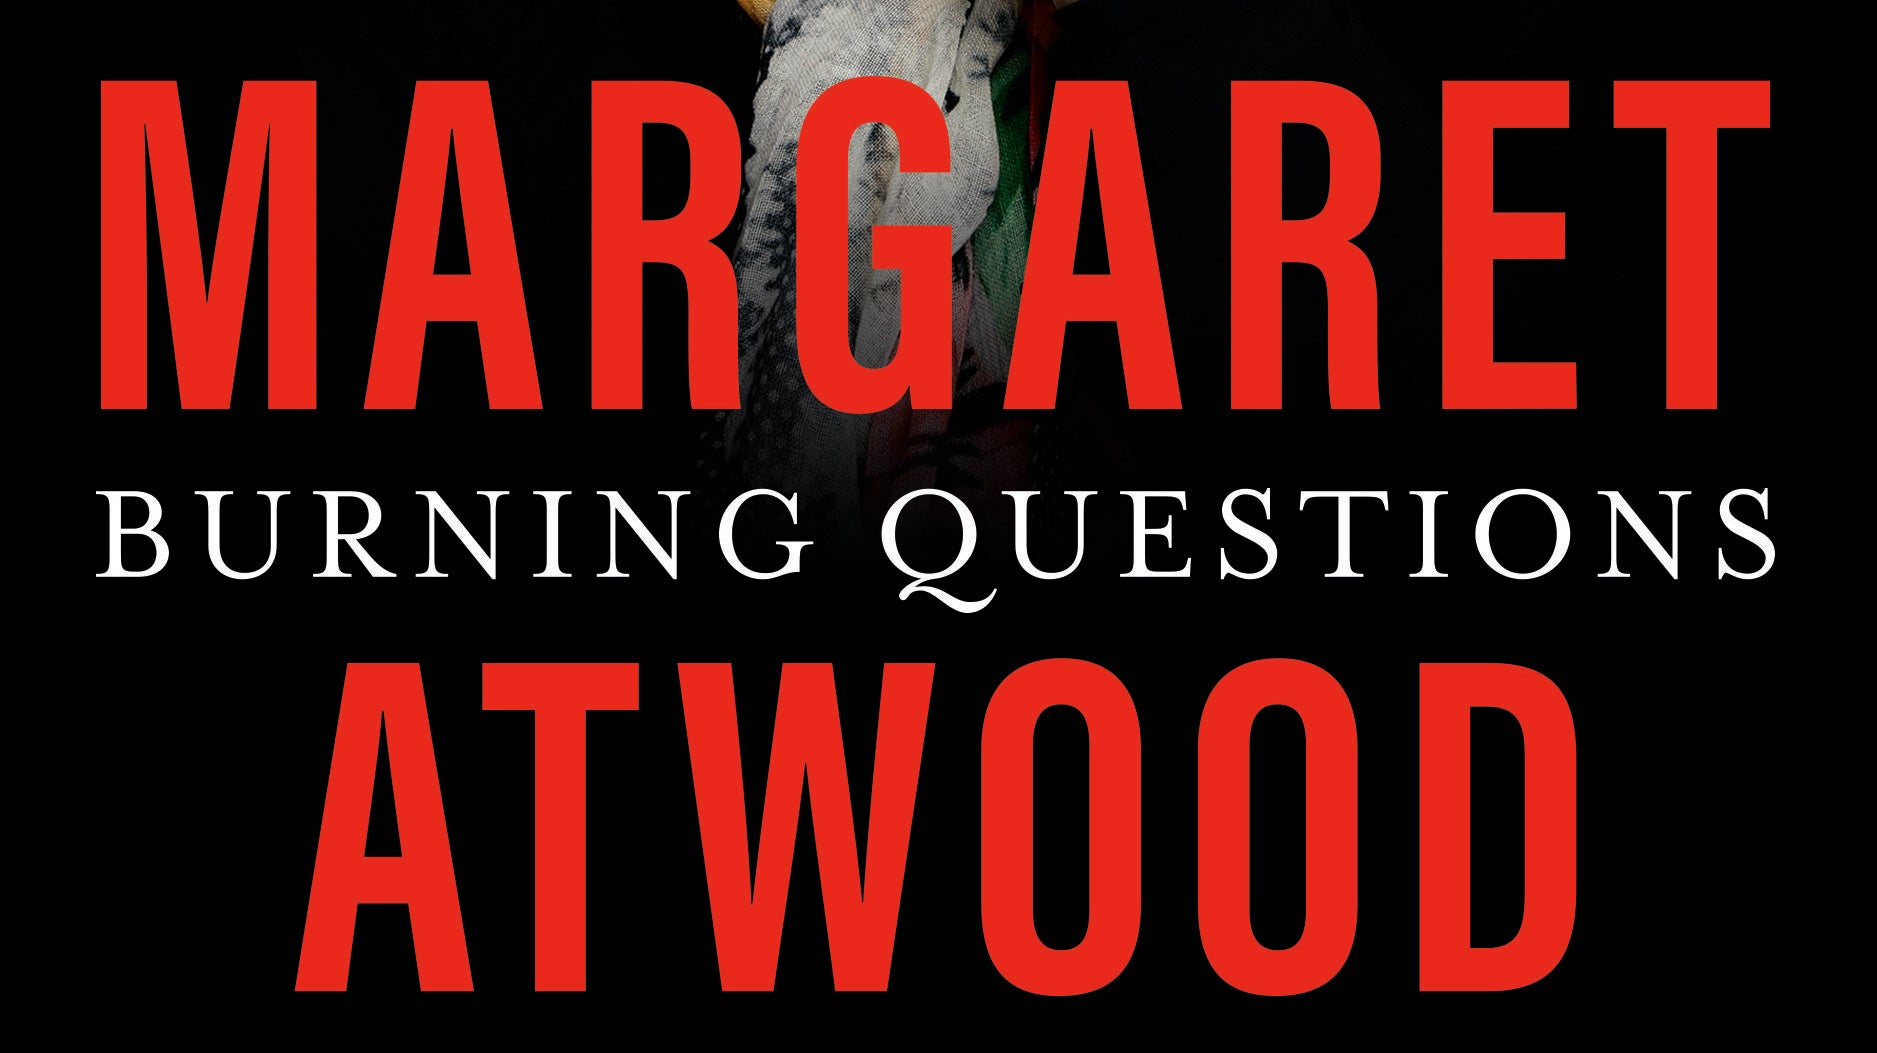 Get Your First Look at <i>Burning Questions</i> by Margaret Atwood!